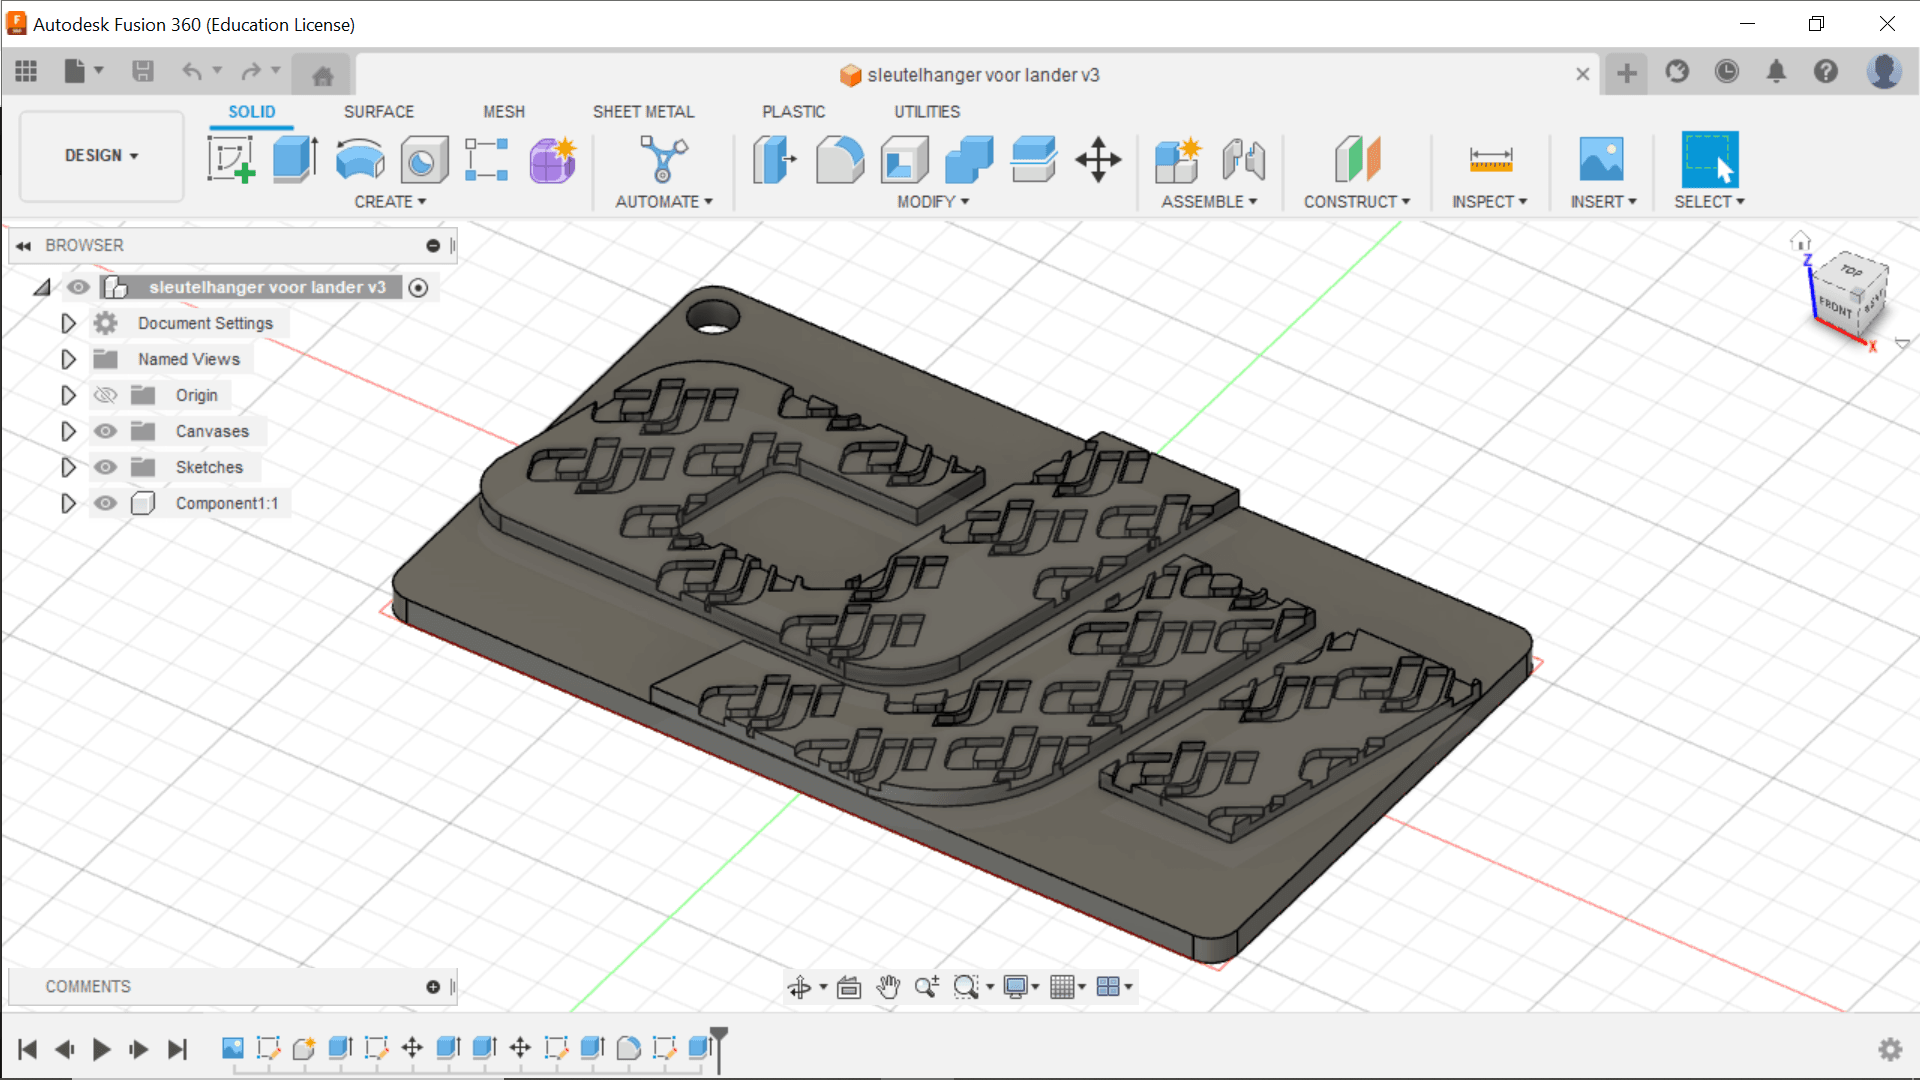 simple DJI keychain with DJI engraved. 3d model